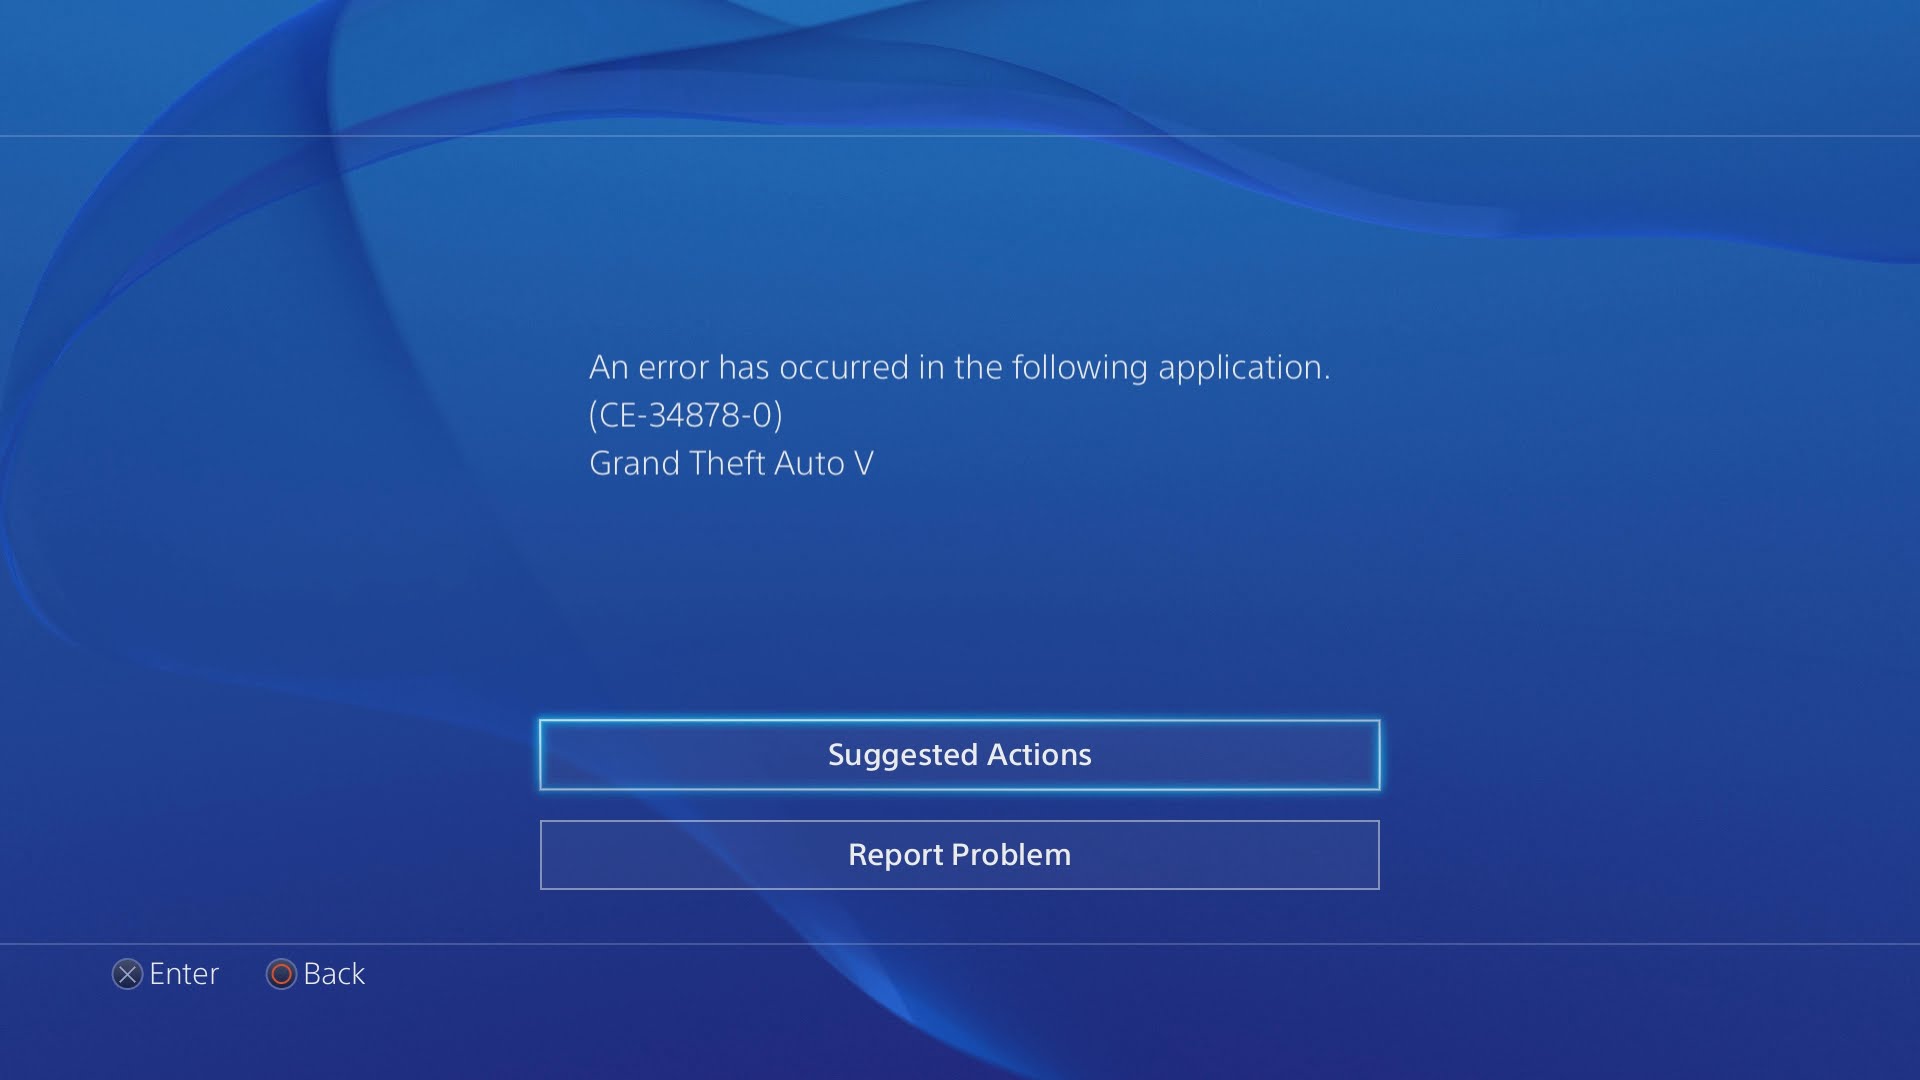 At bygge beholder Undervisning How to fix PS4 CE-34878-0 error?